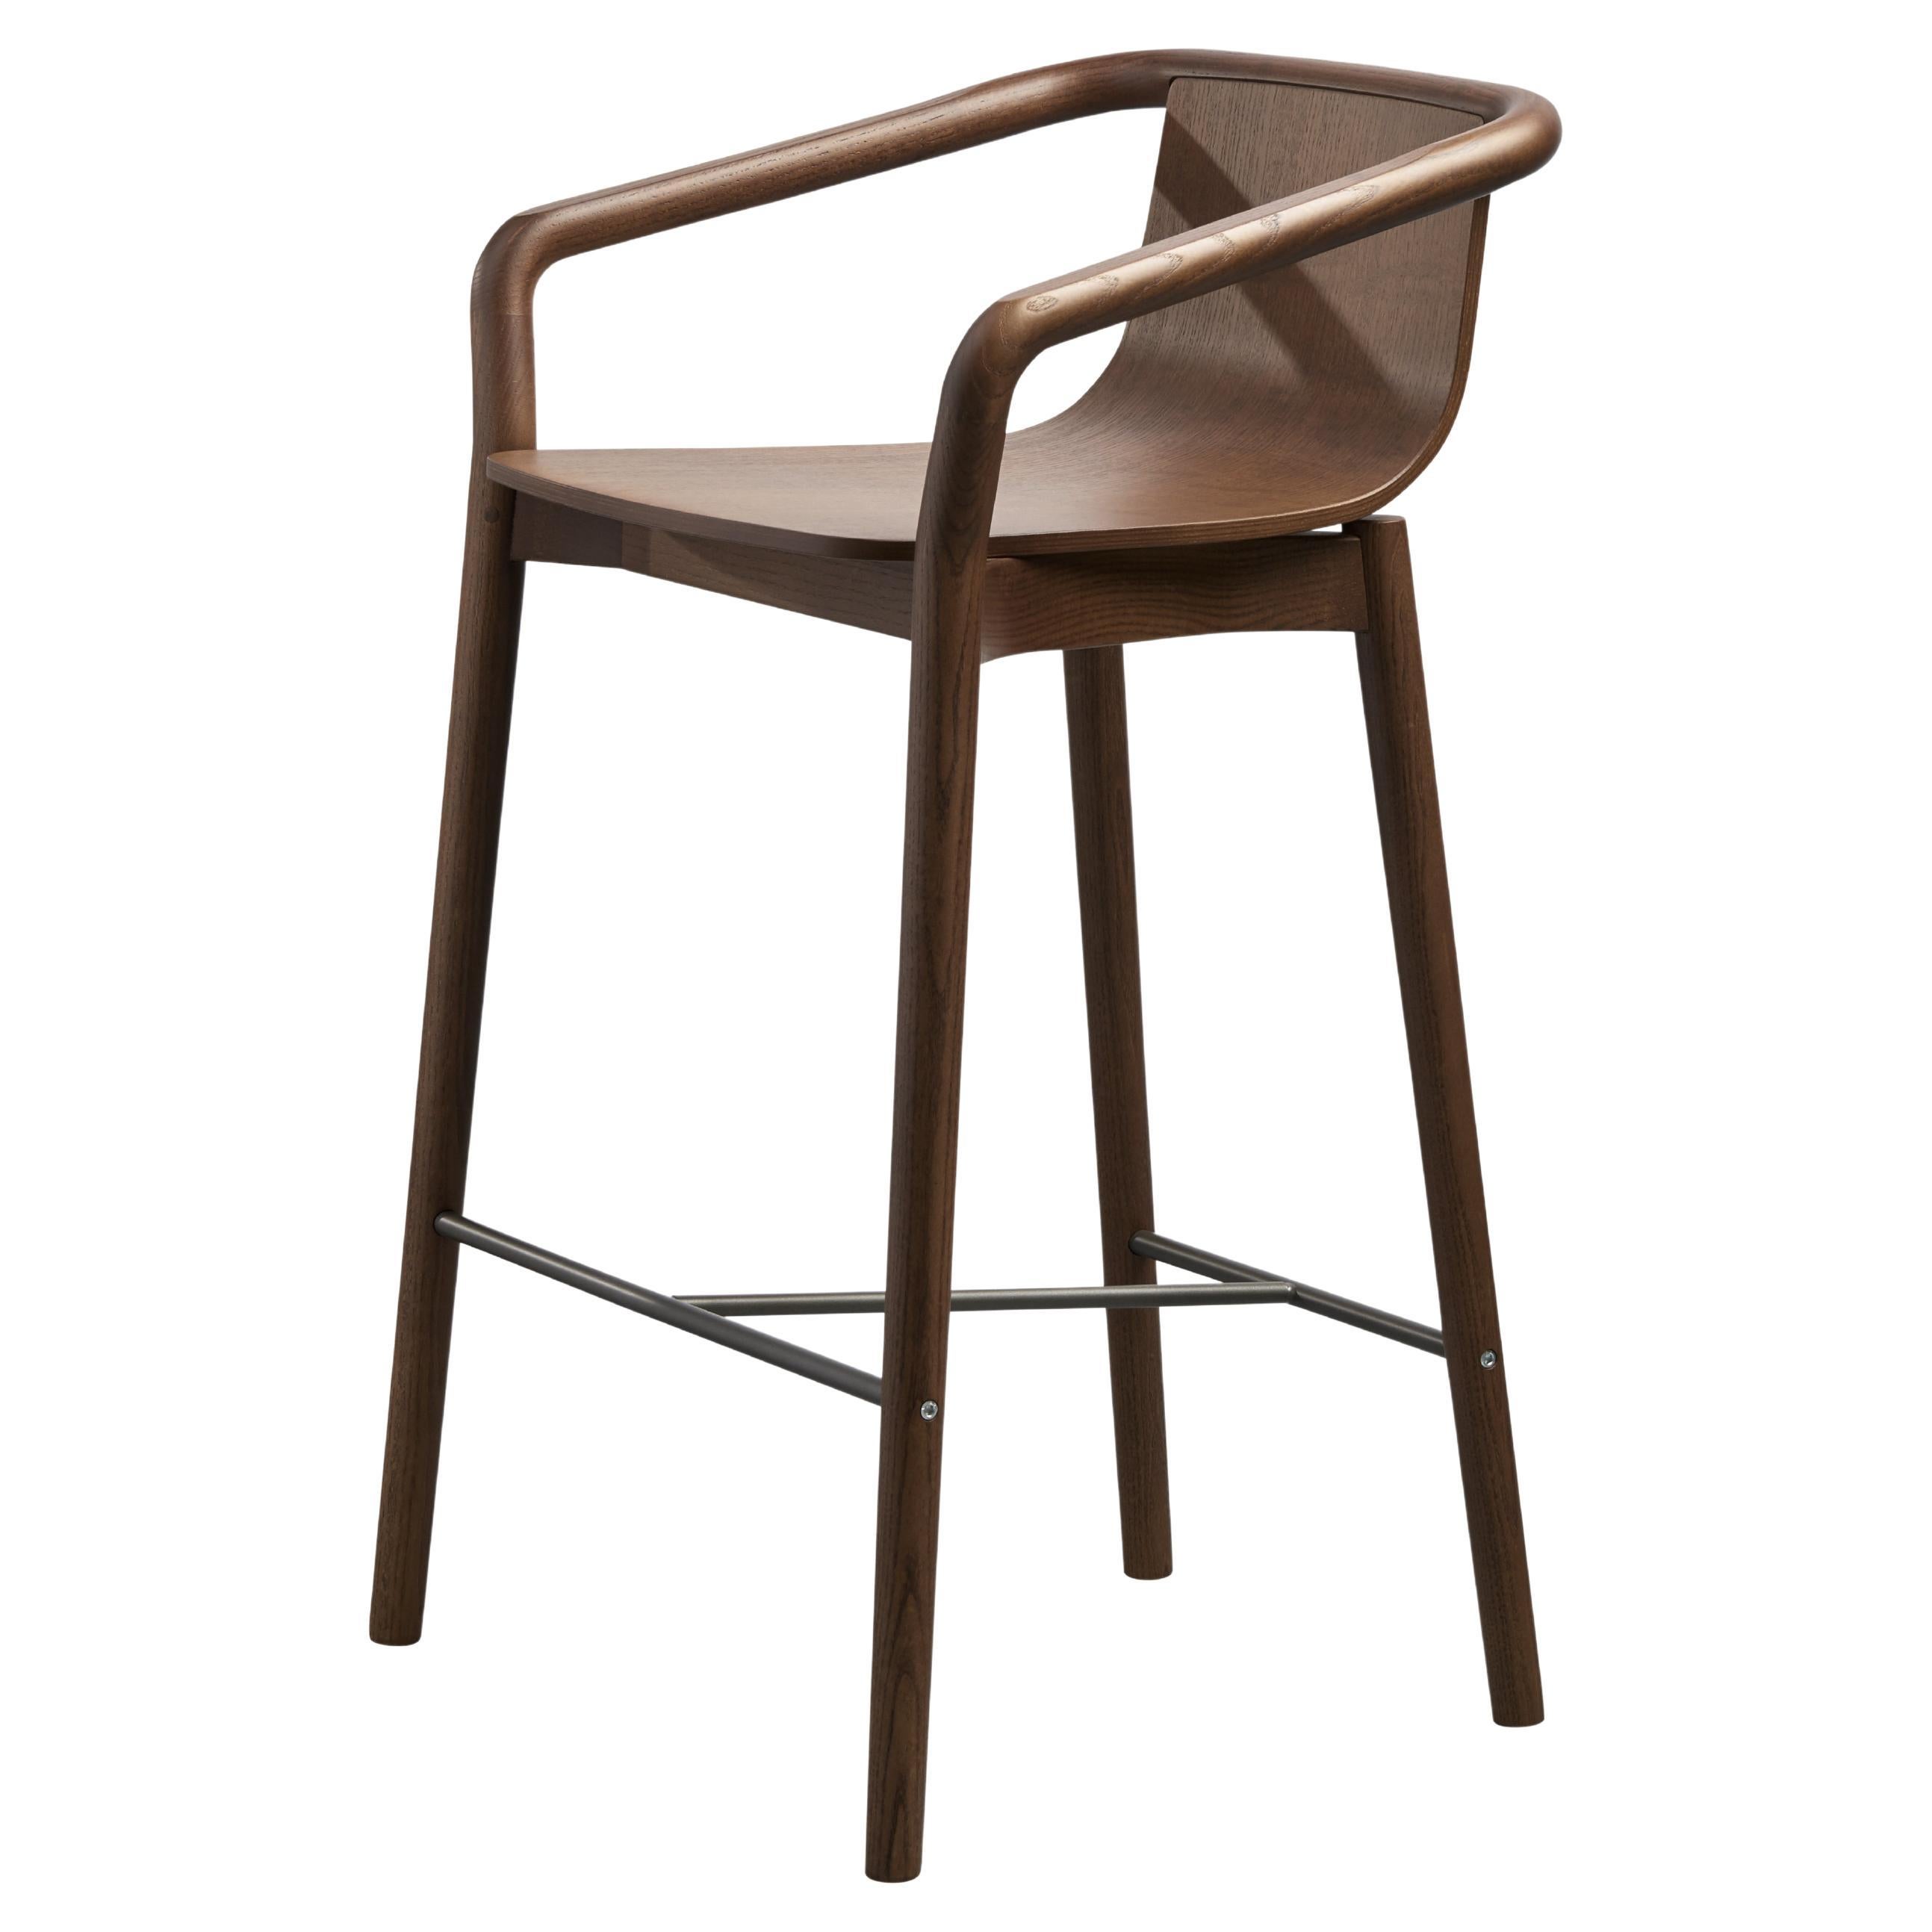 SP01 Thomas Low Bar Stool in Walnut Stained Ash, Made in Italy